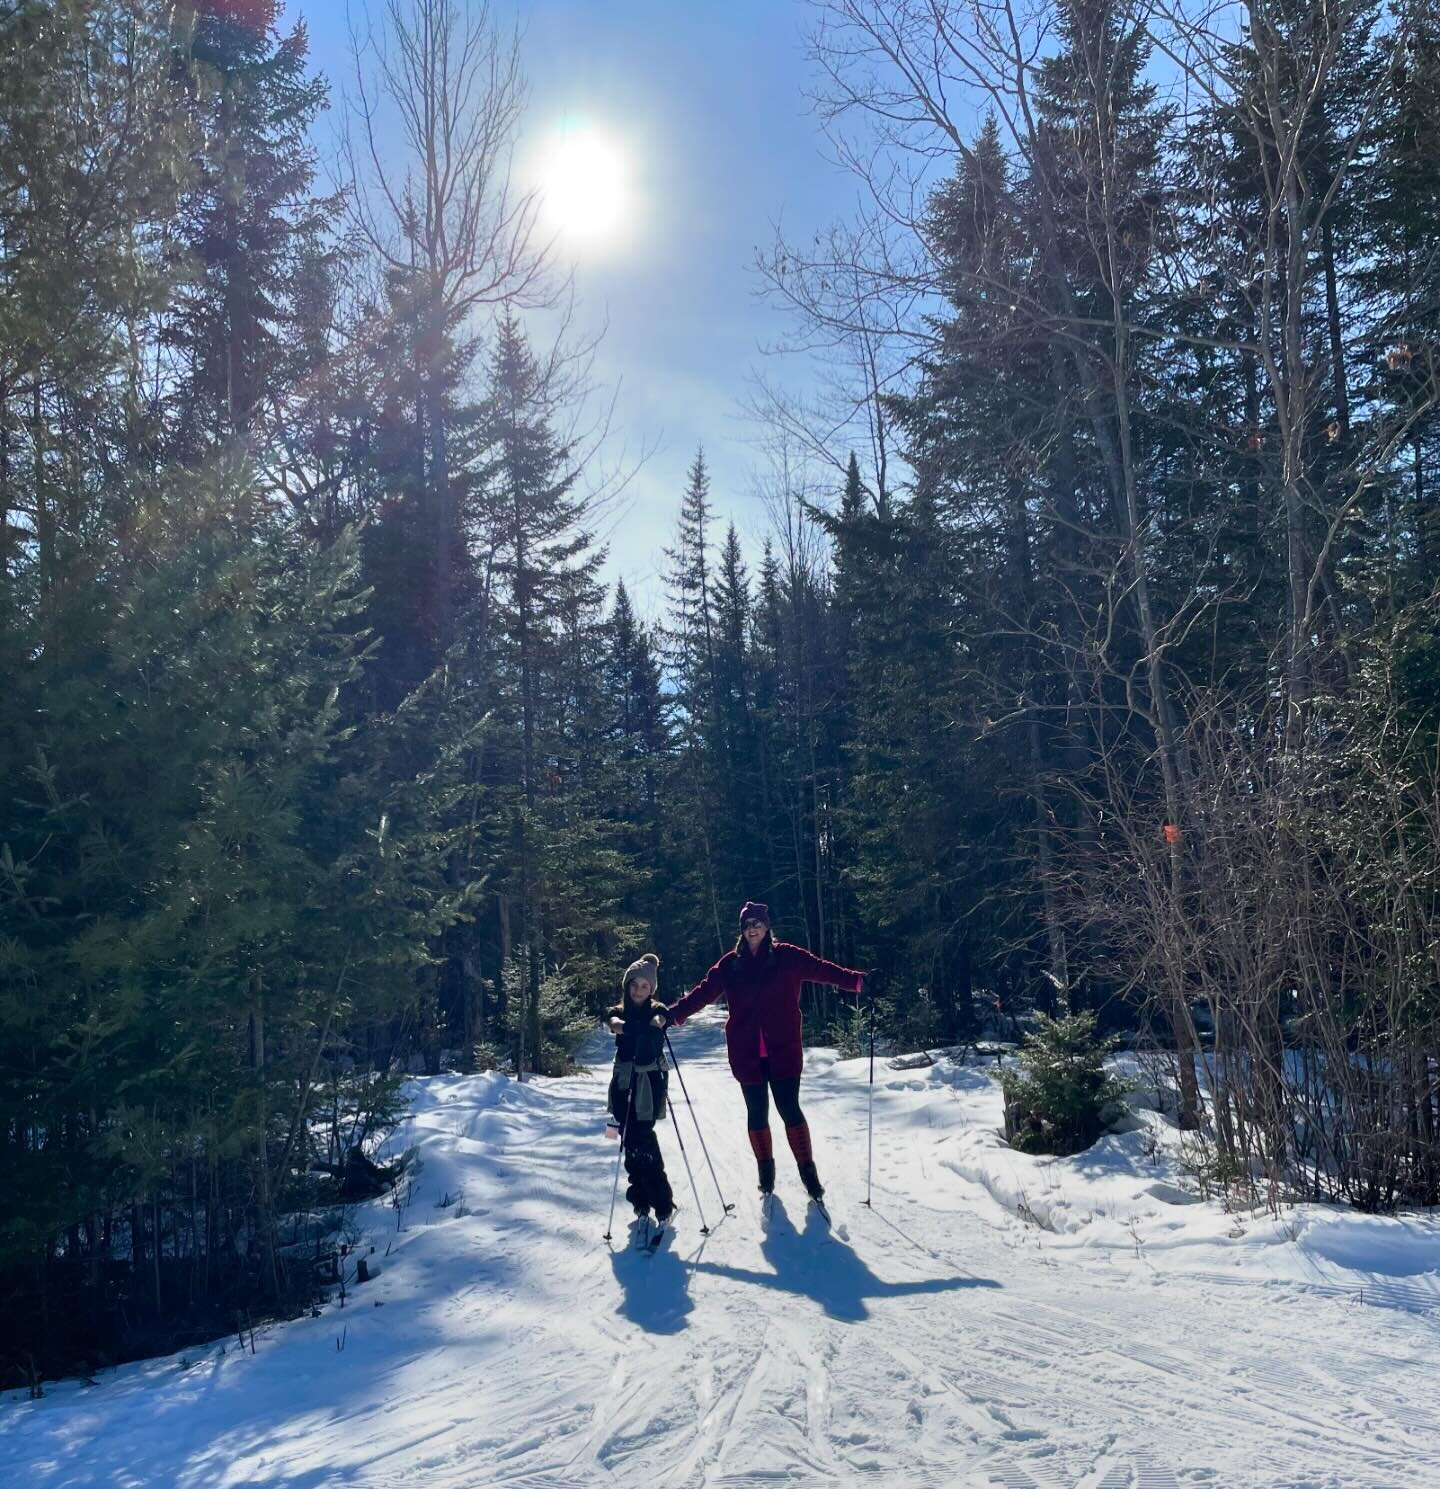 An absolutely gorgeous Maine day. Perfect opportunity to learn how to XC ski for the first time. We loved it!